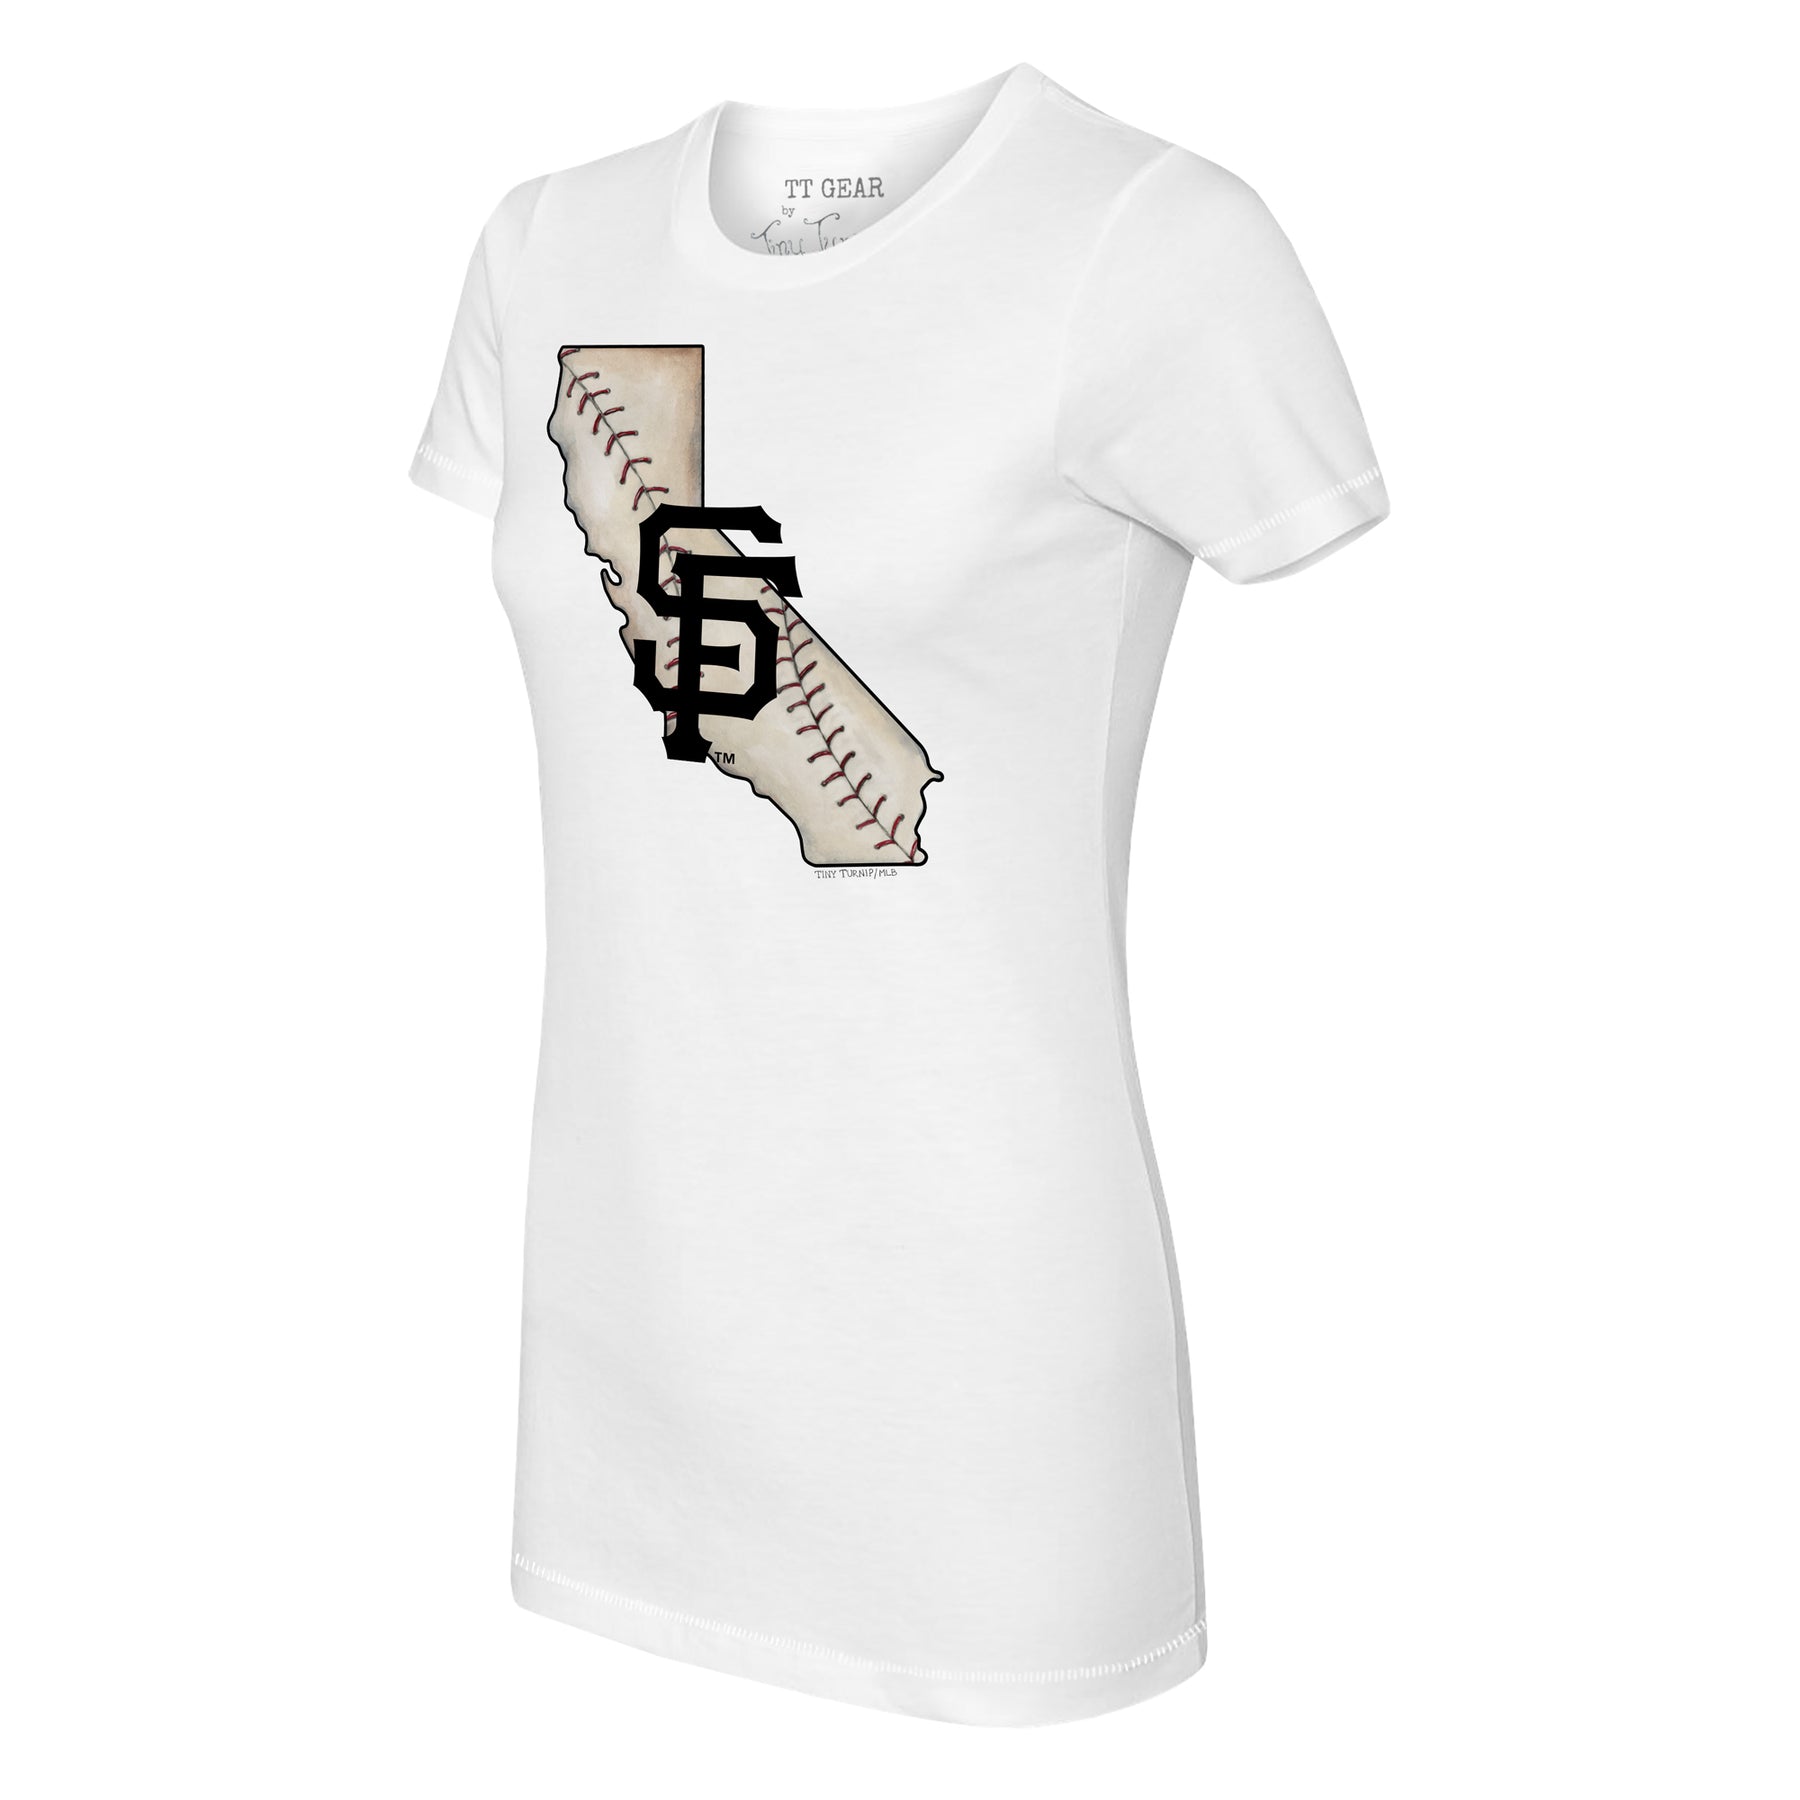 San Francisco Giants State Outline Tee Shirt Women's Large / White